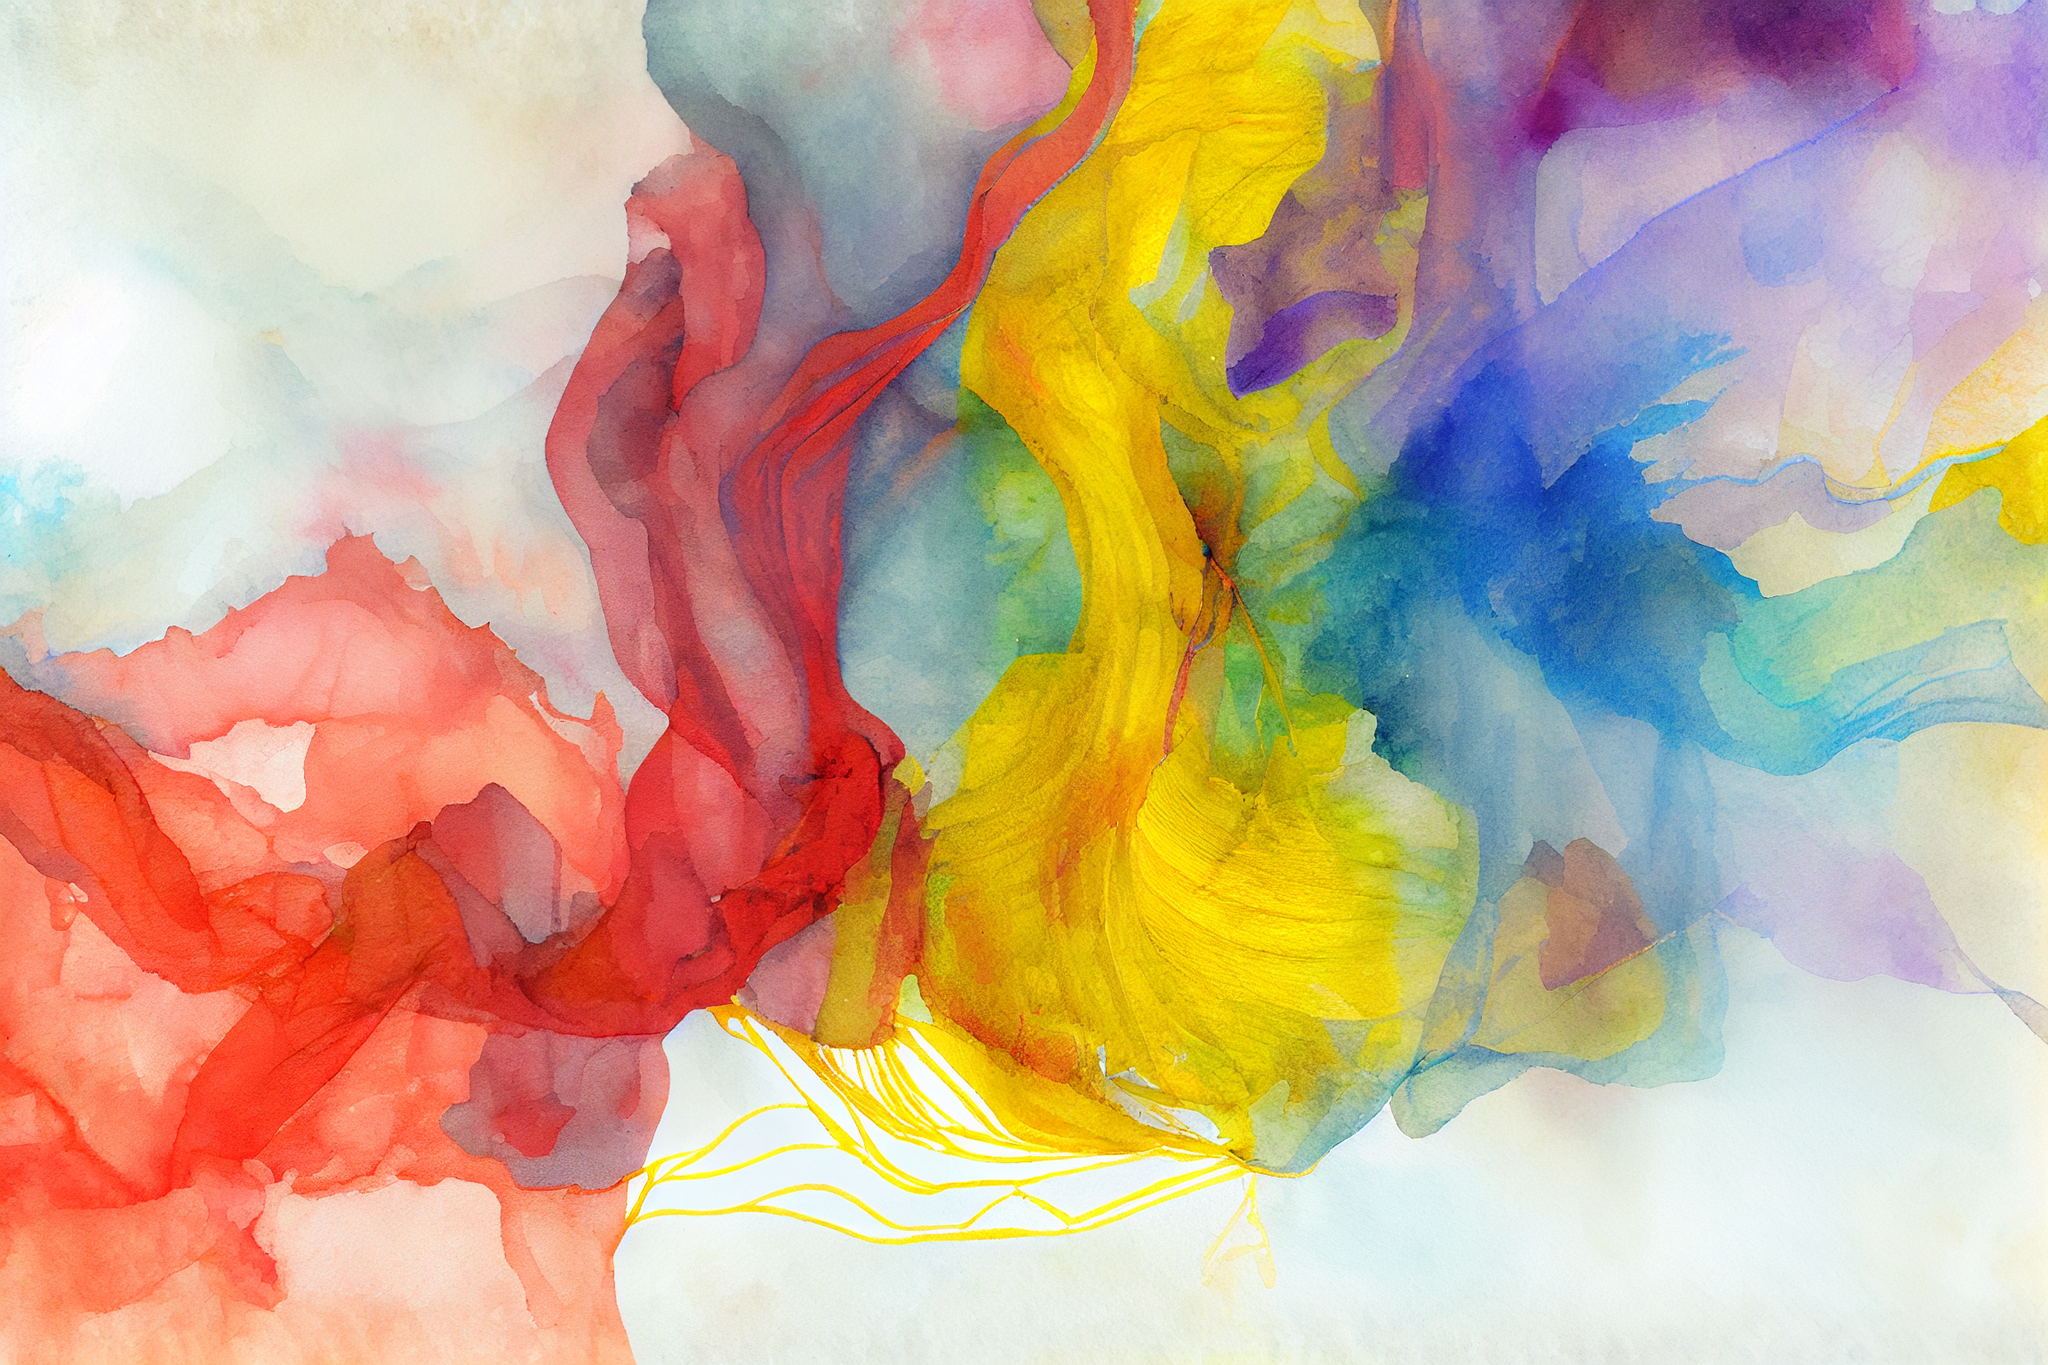 Enchanting Spectrum: A Watercolor Abstract Art Print of Spectral Colors